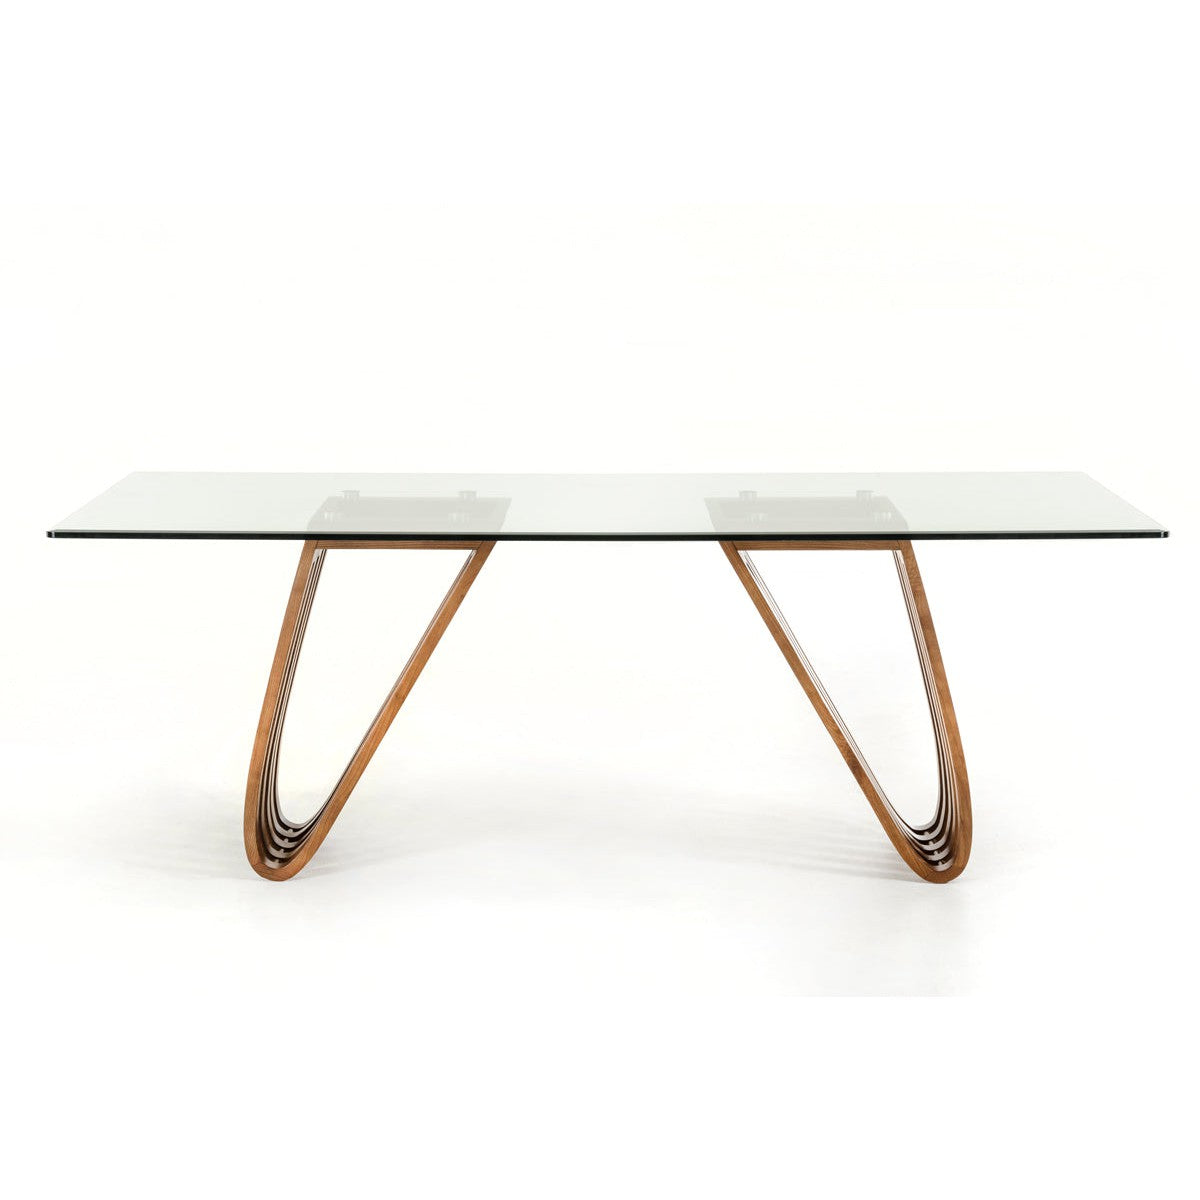 HomeRoots 30" Walnut Wood And Glass Dining Table